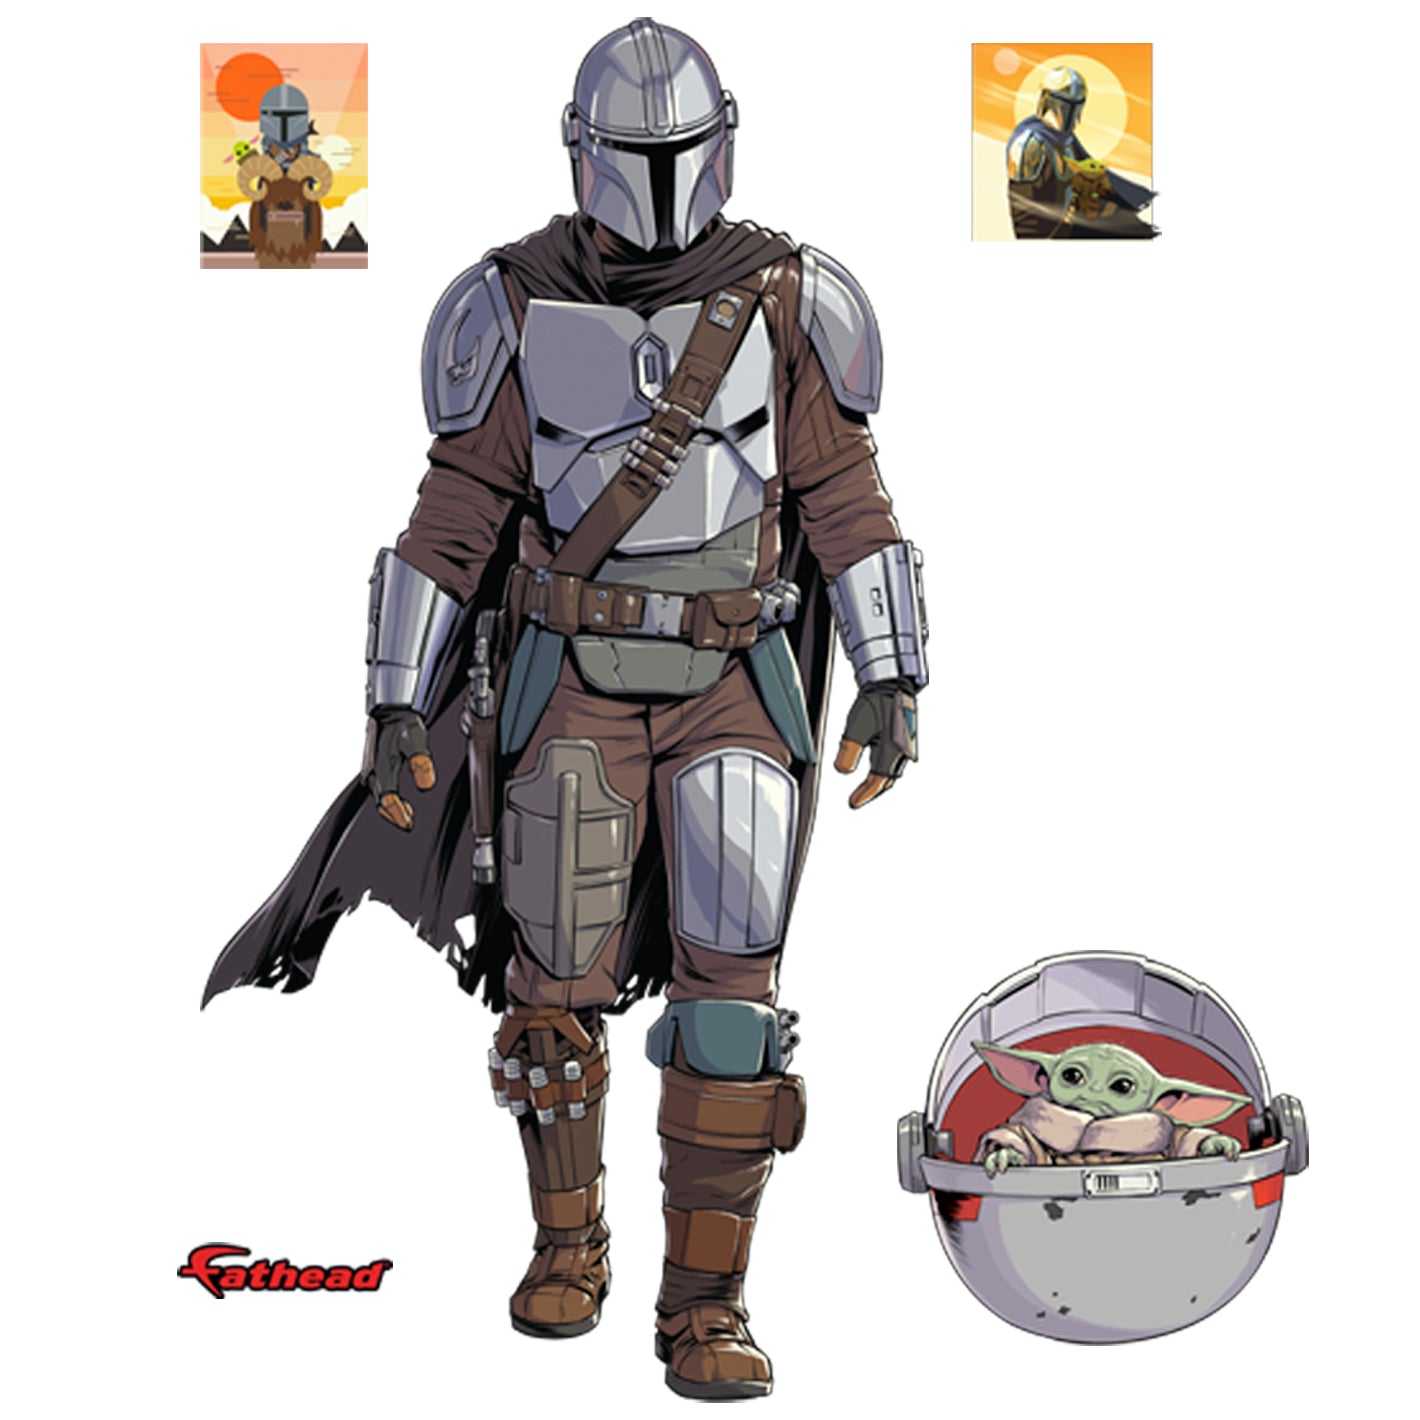 The Mandalorian with Child  - Officially Licensed Star Wars Removable Wall Decal